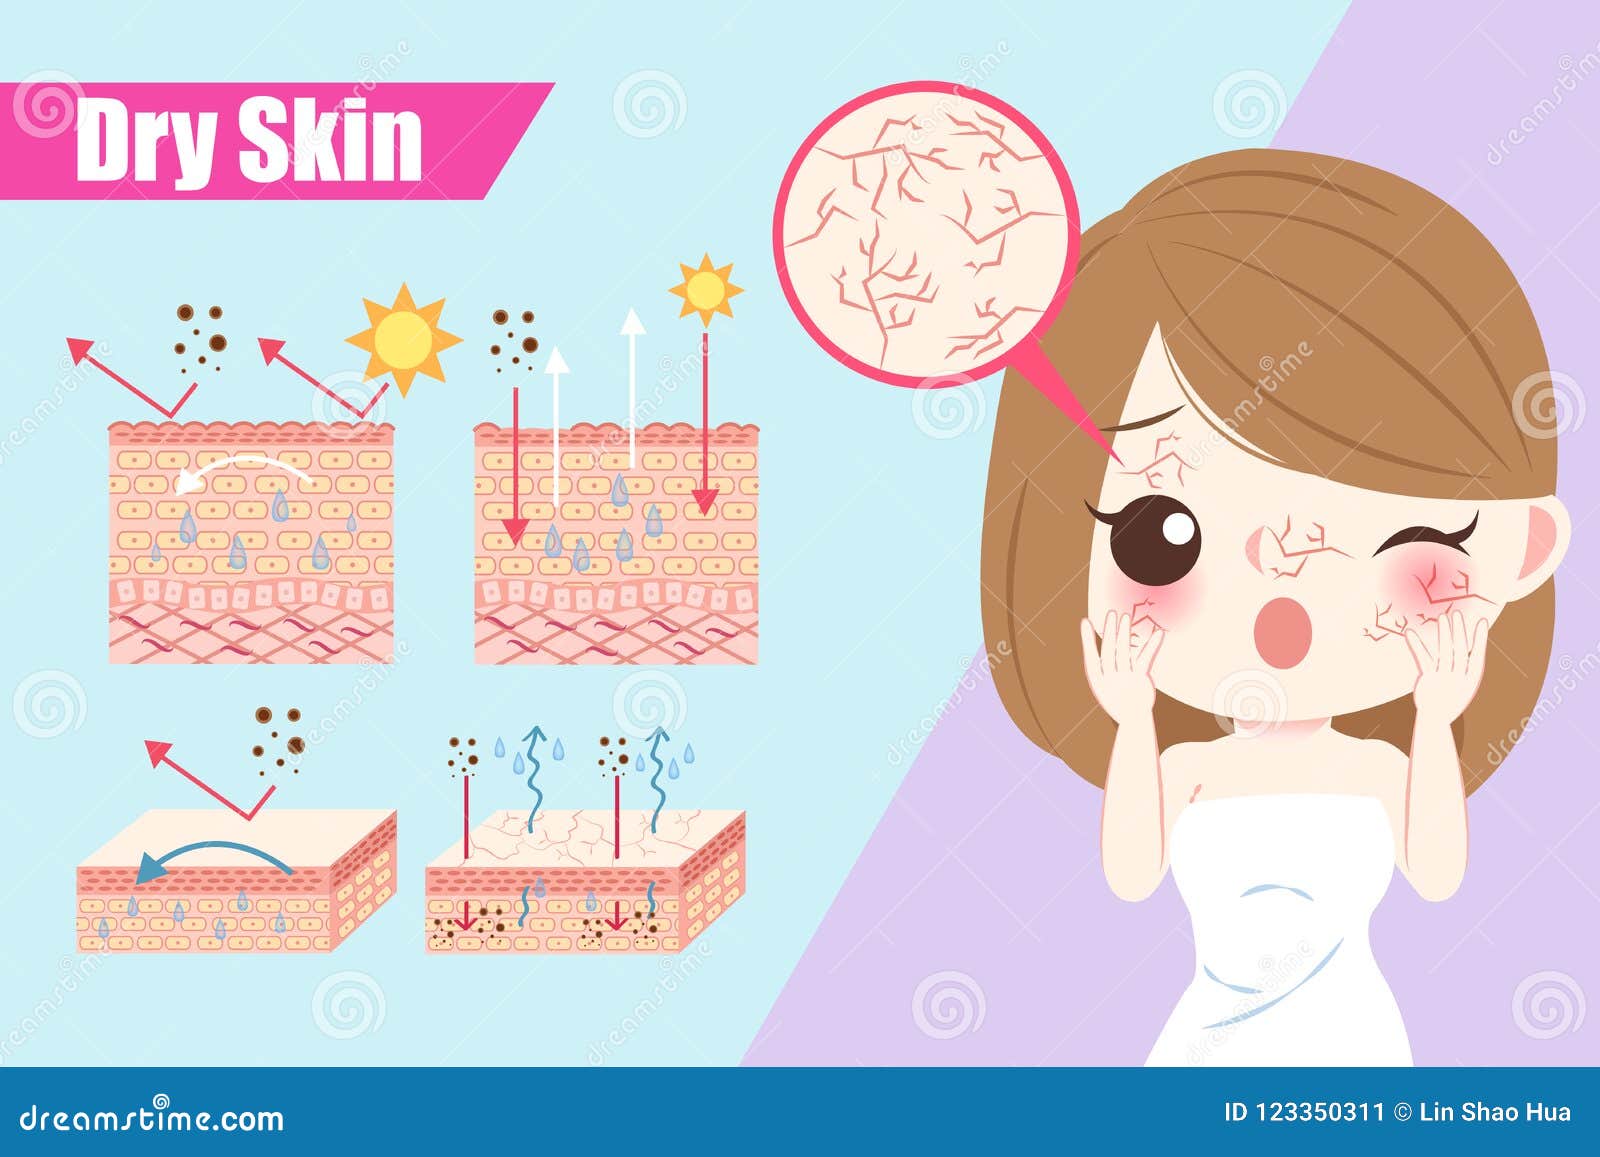 woman with dry skin concept